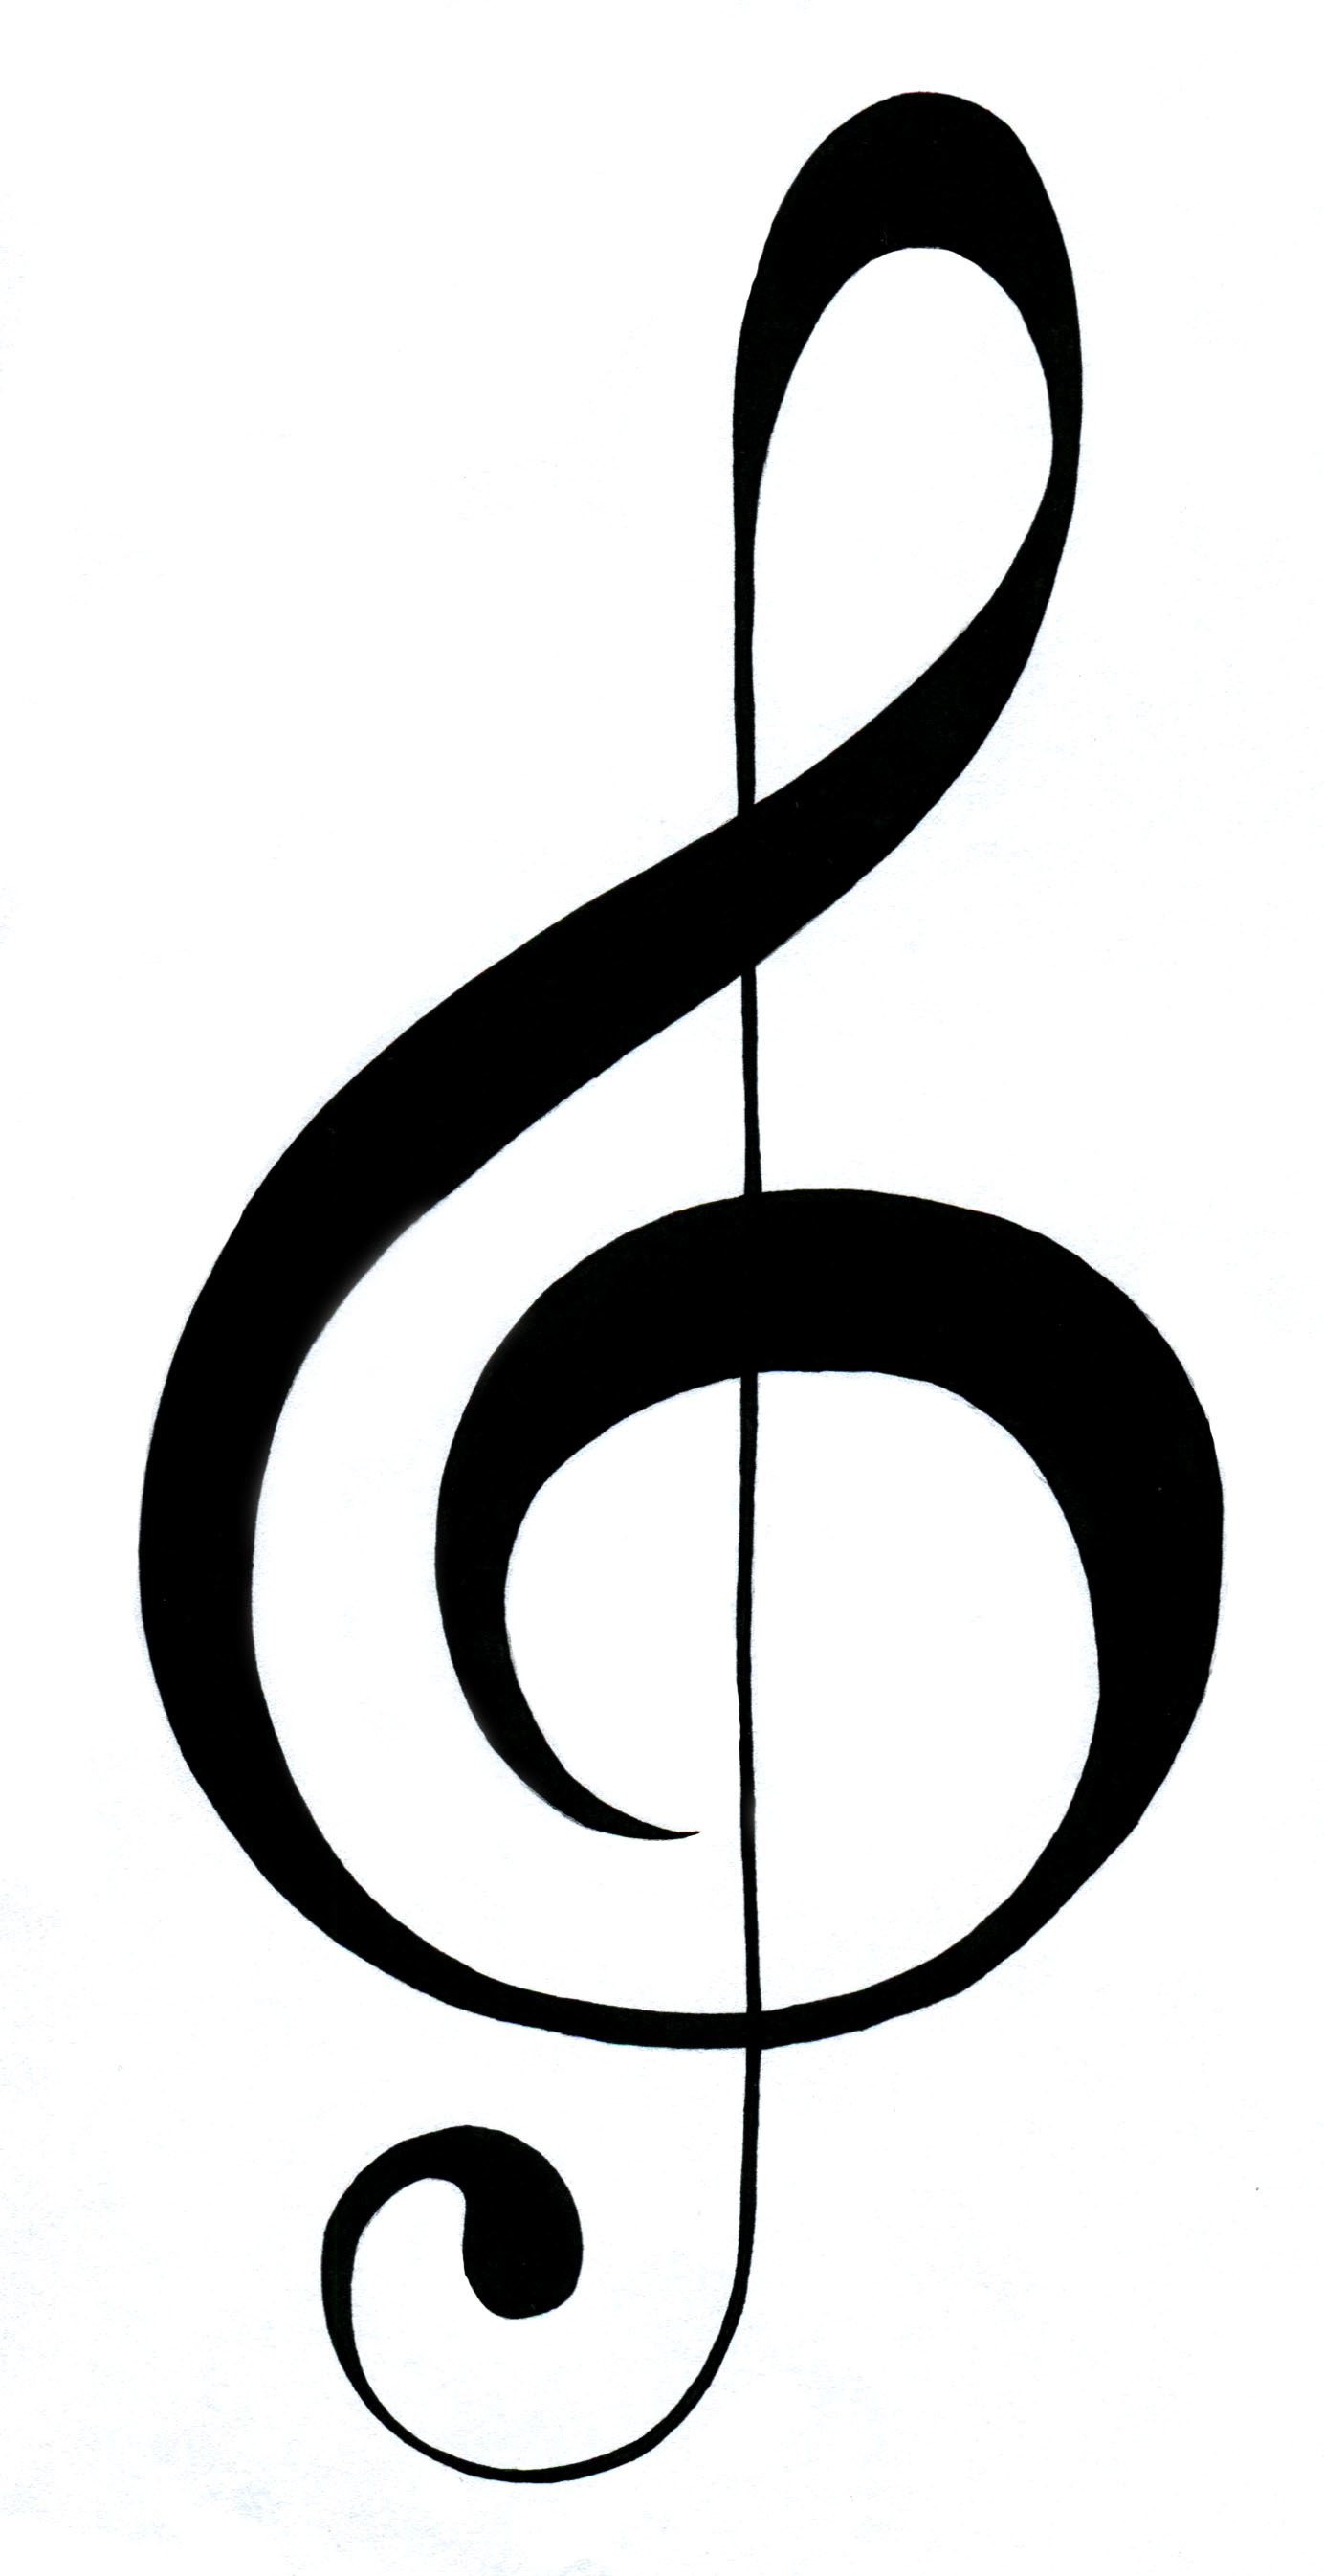 1384x2692 Treble Clef Image - Clipart library